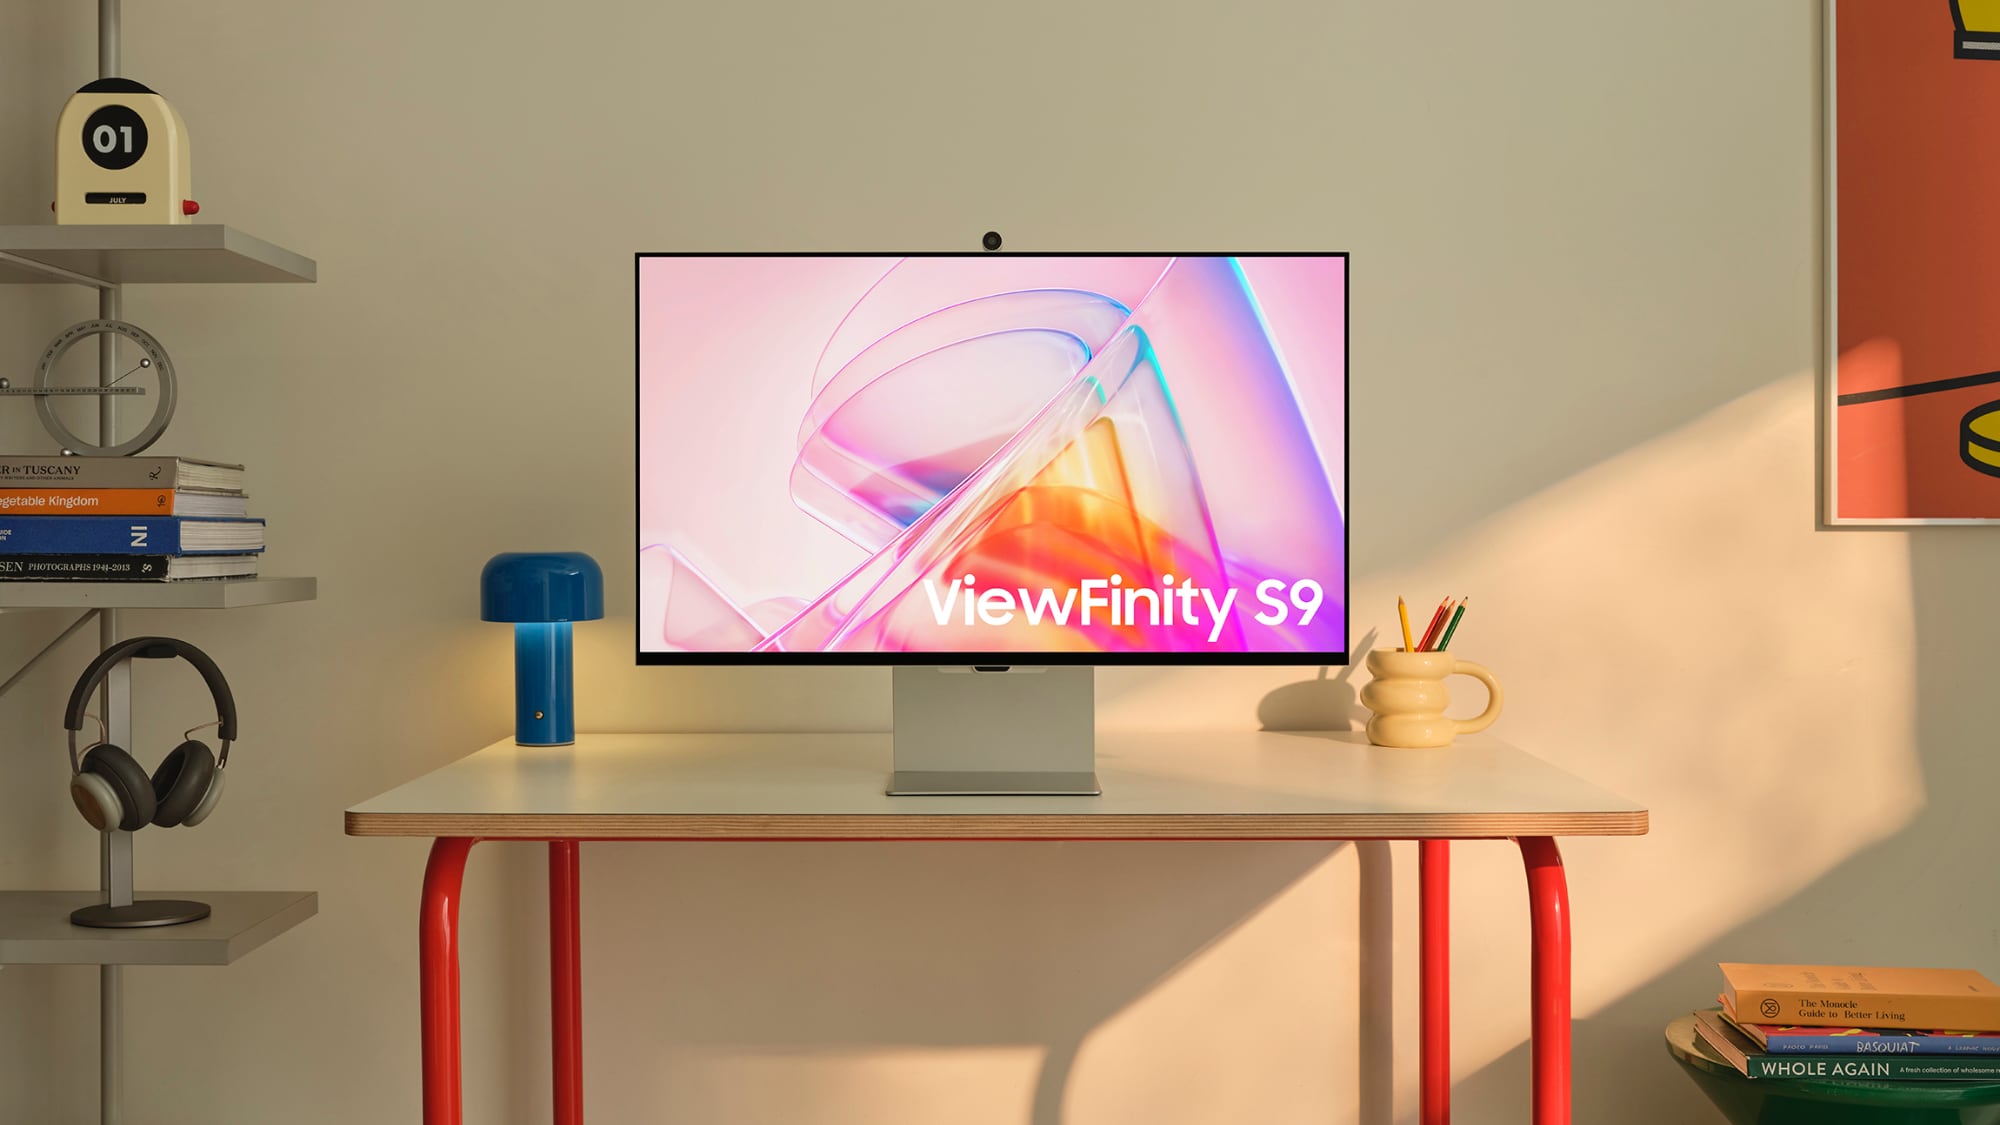 Samsung’s ViewFinity S9 5K Display Launches in the U.S.